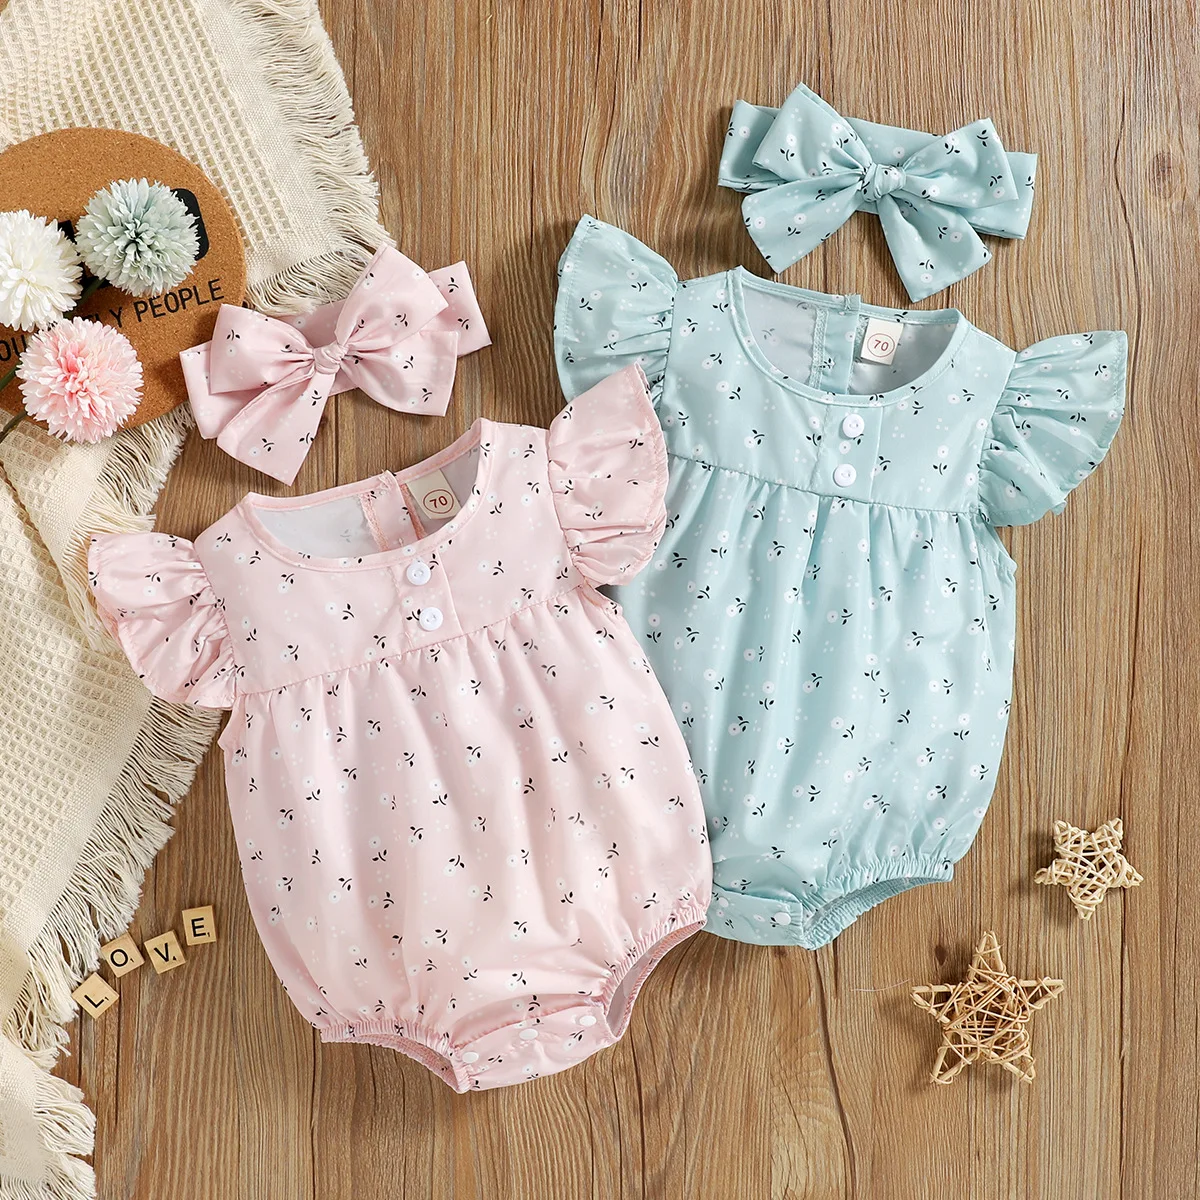 Newborn Baby Girl Clothes Set Fashion Summer Sleeveless Solid Jumpsuit Infant Baby Clothing Outfit Sisters Hairband 2Pcs 3-18M